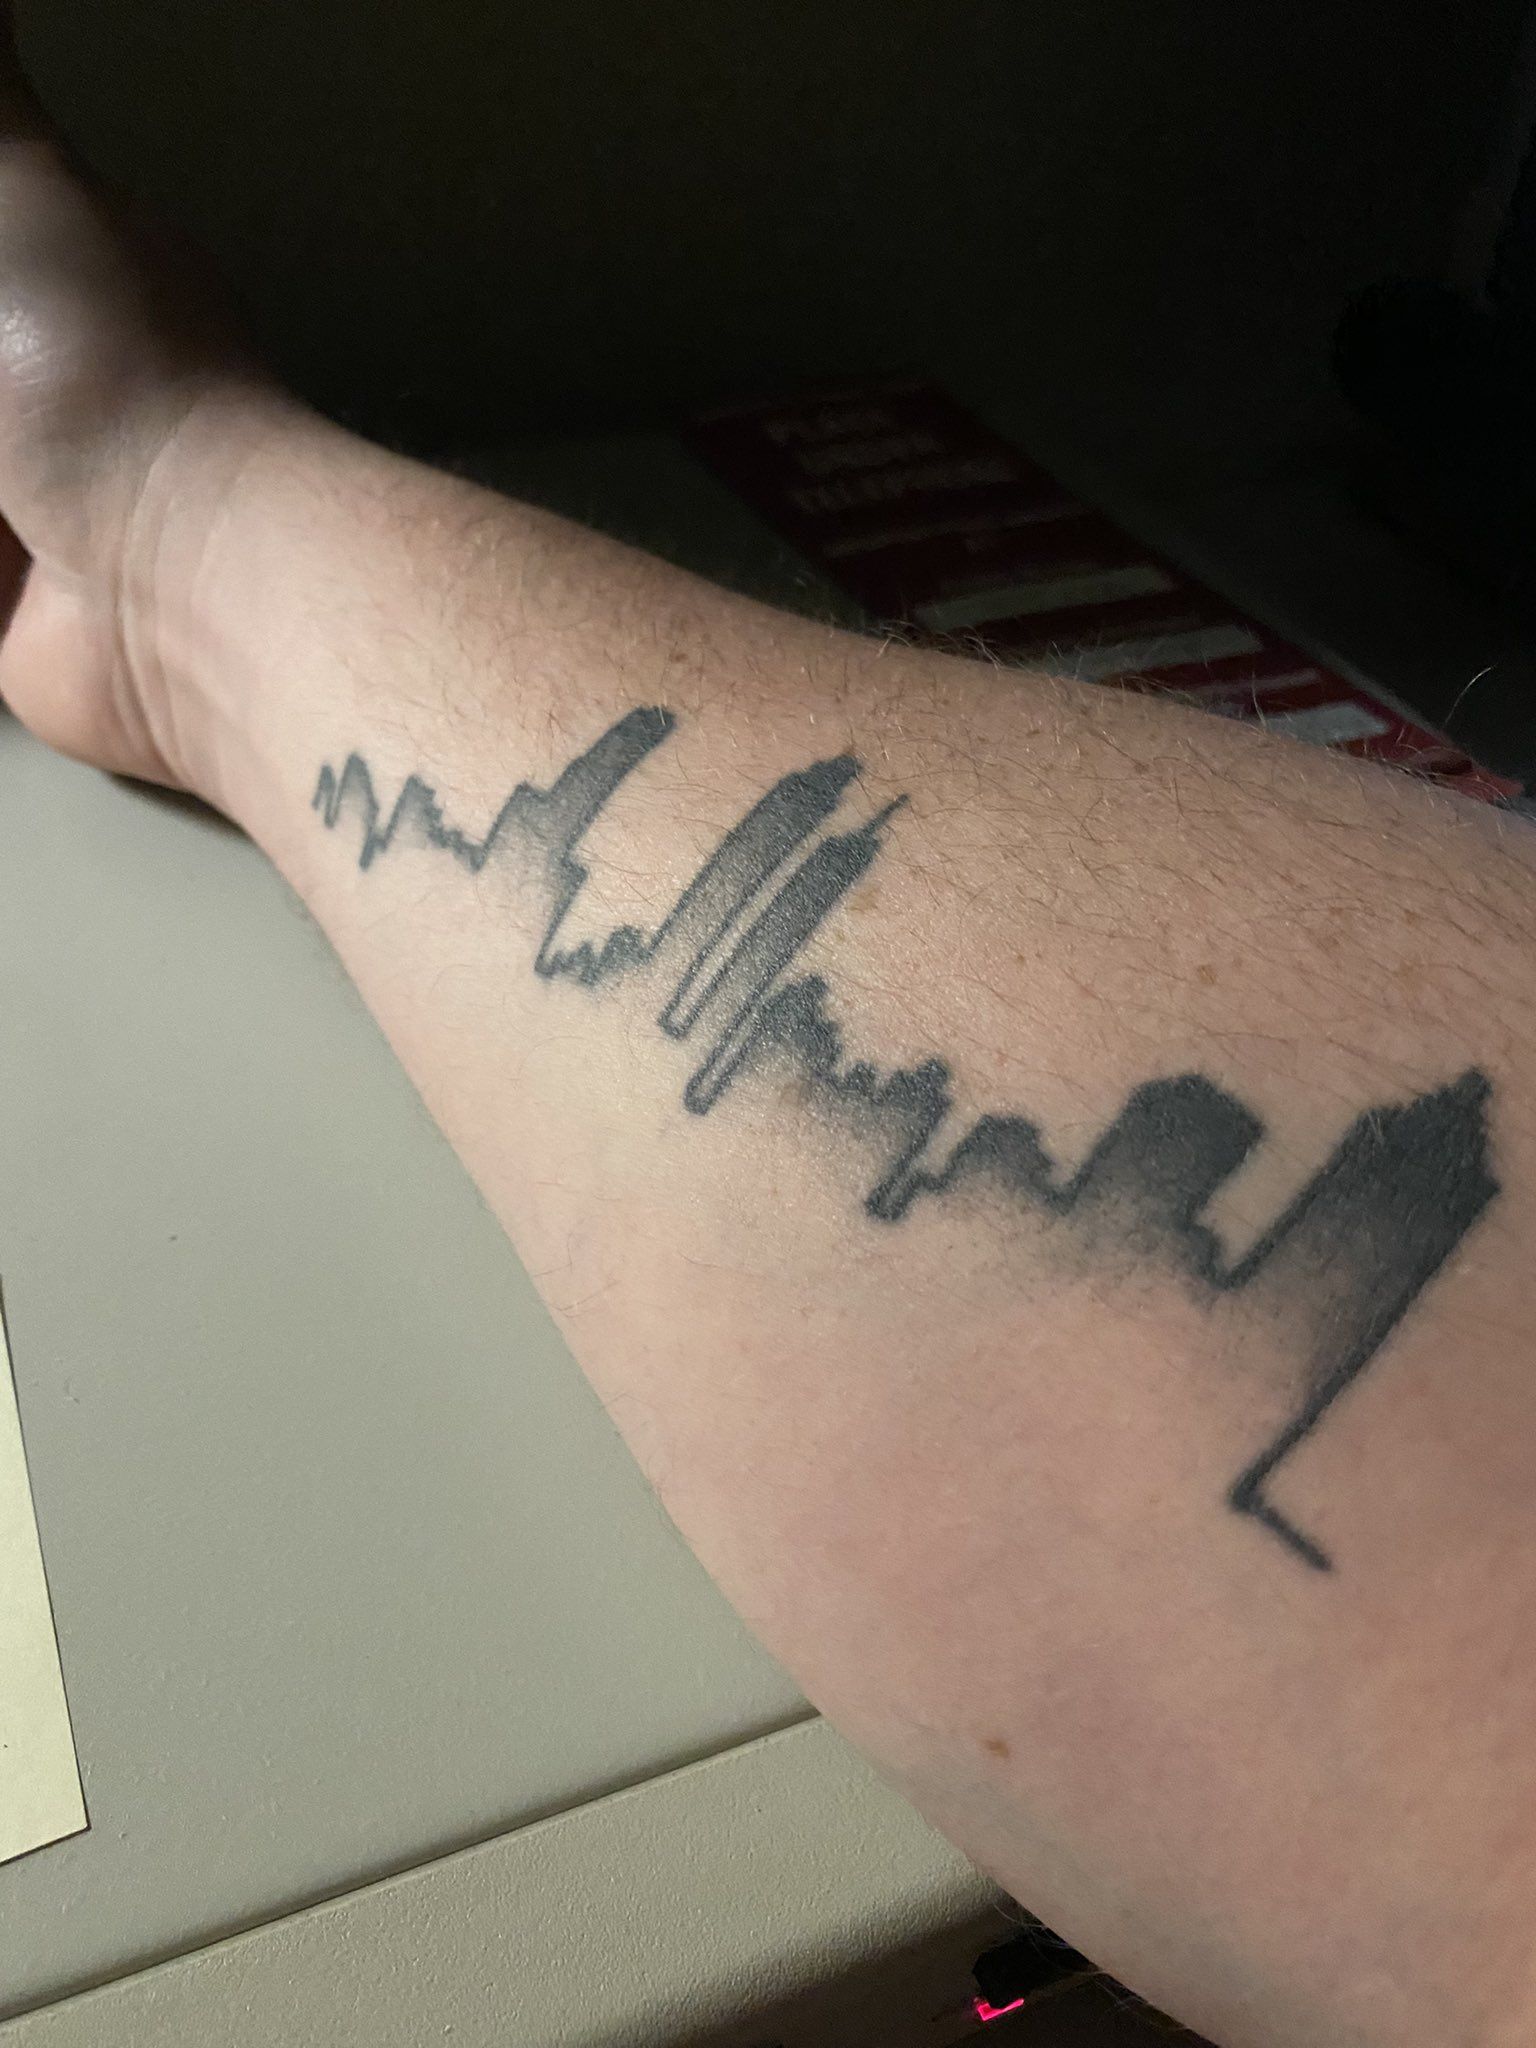 A tattoo of a silhouette of the Atlanta skyline on a person's forearm